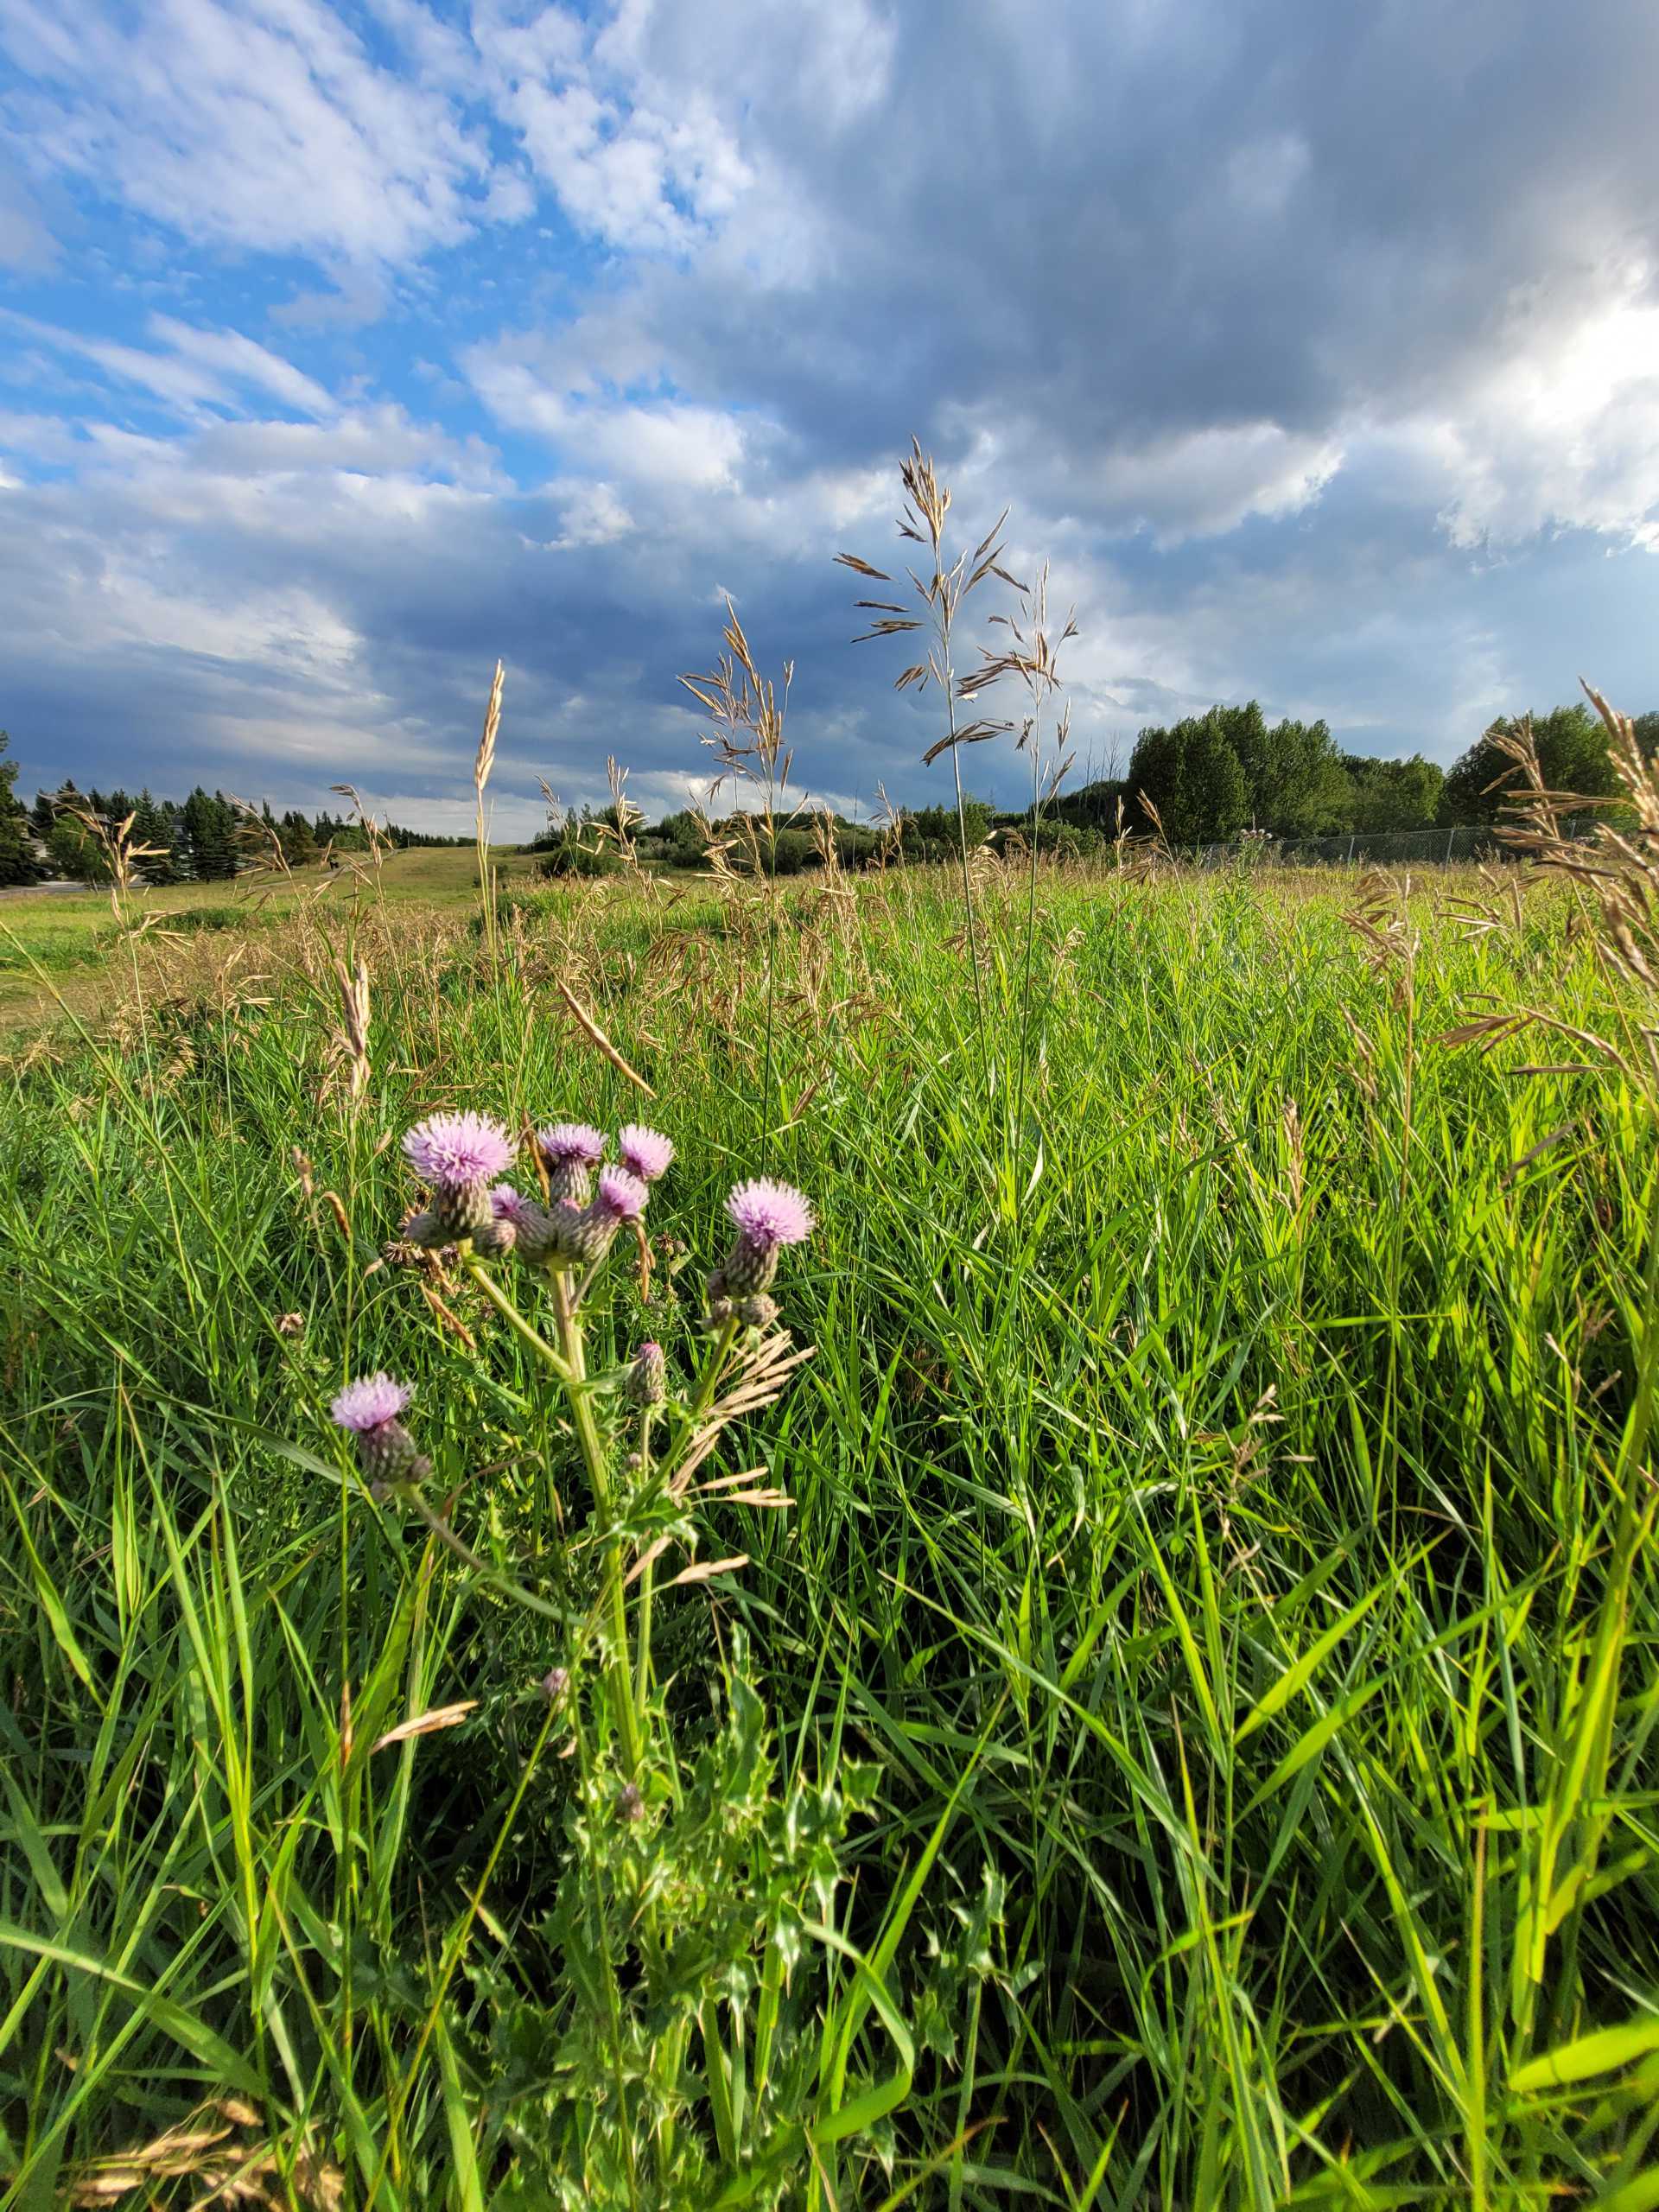 Pink thistles in a green field with a blue sky with puffy clouds